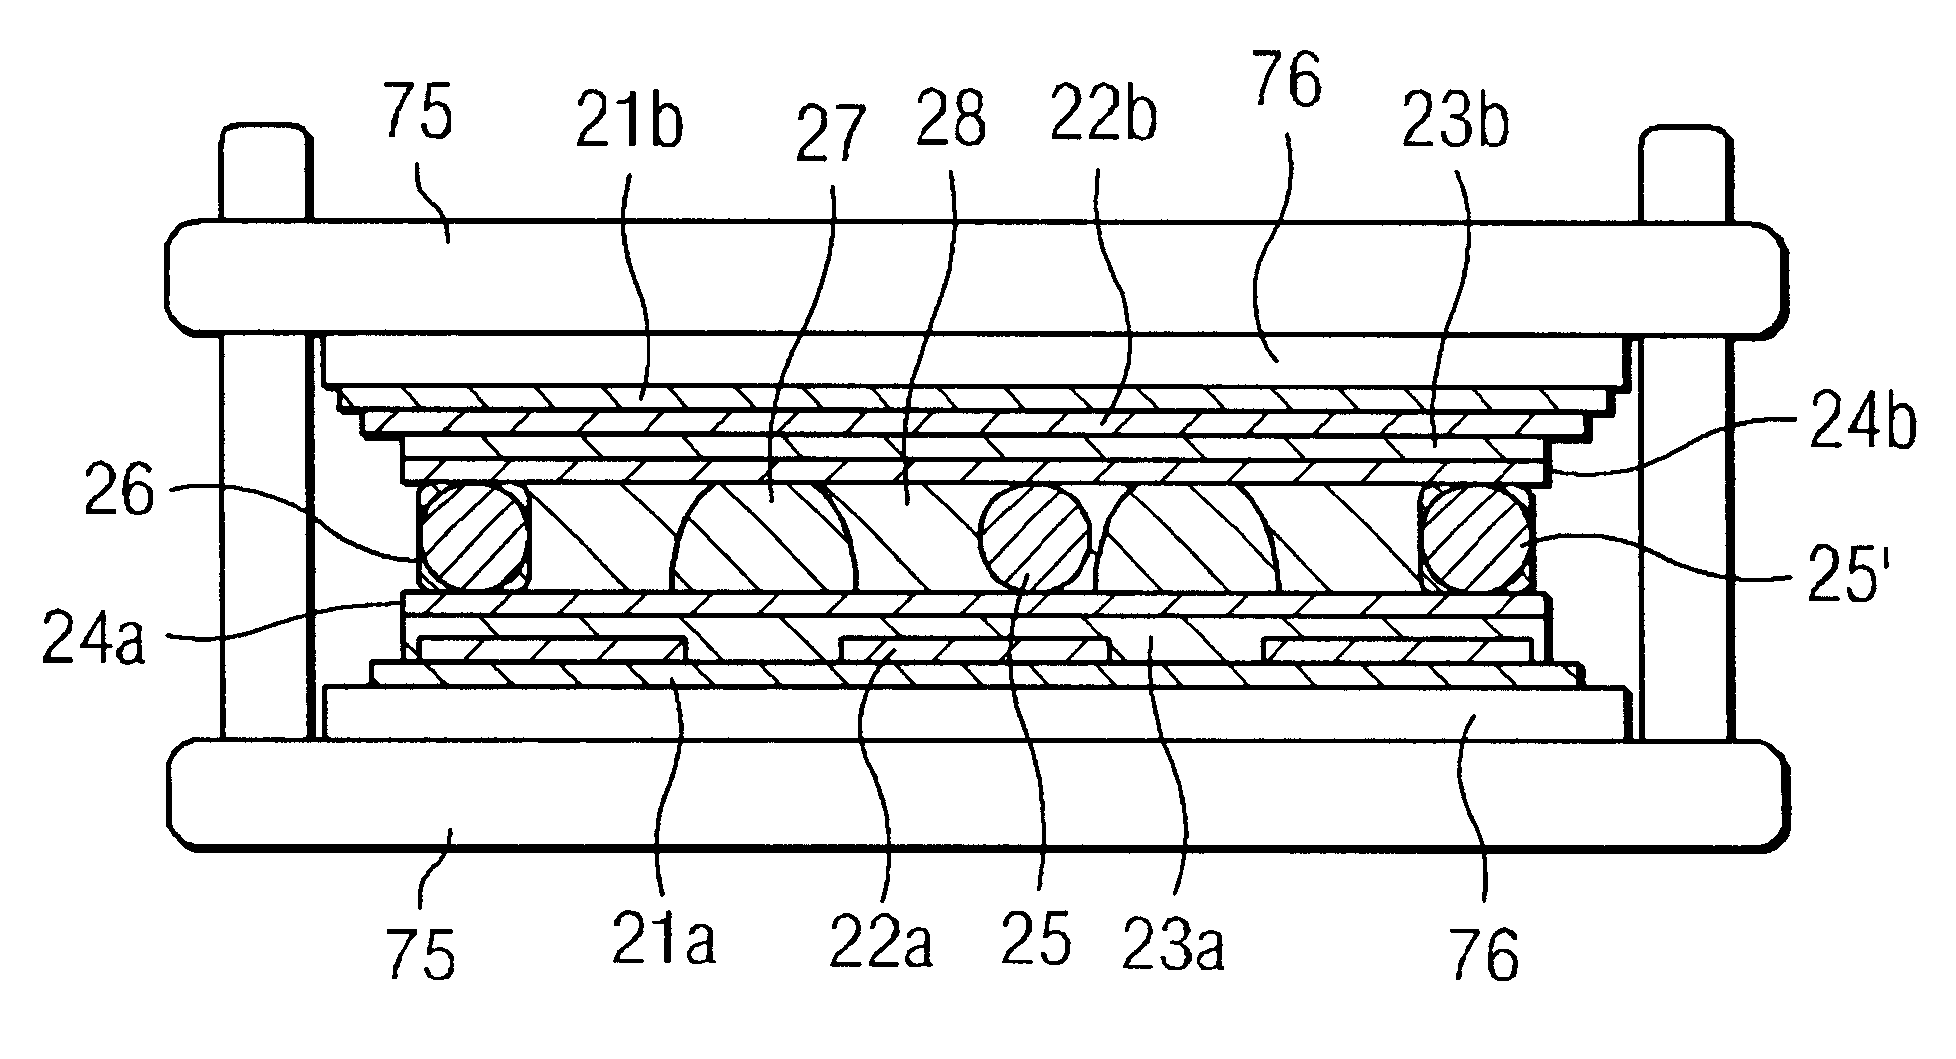 Liquid crystal light modulating device and a method for manufacturing same